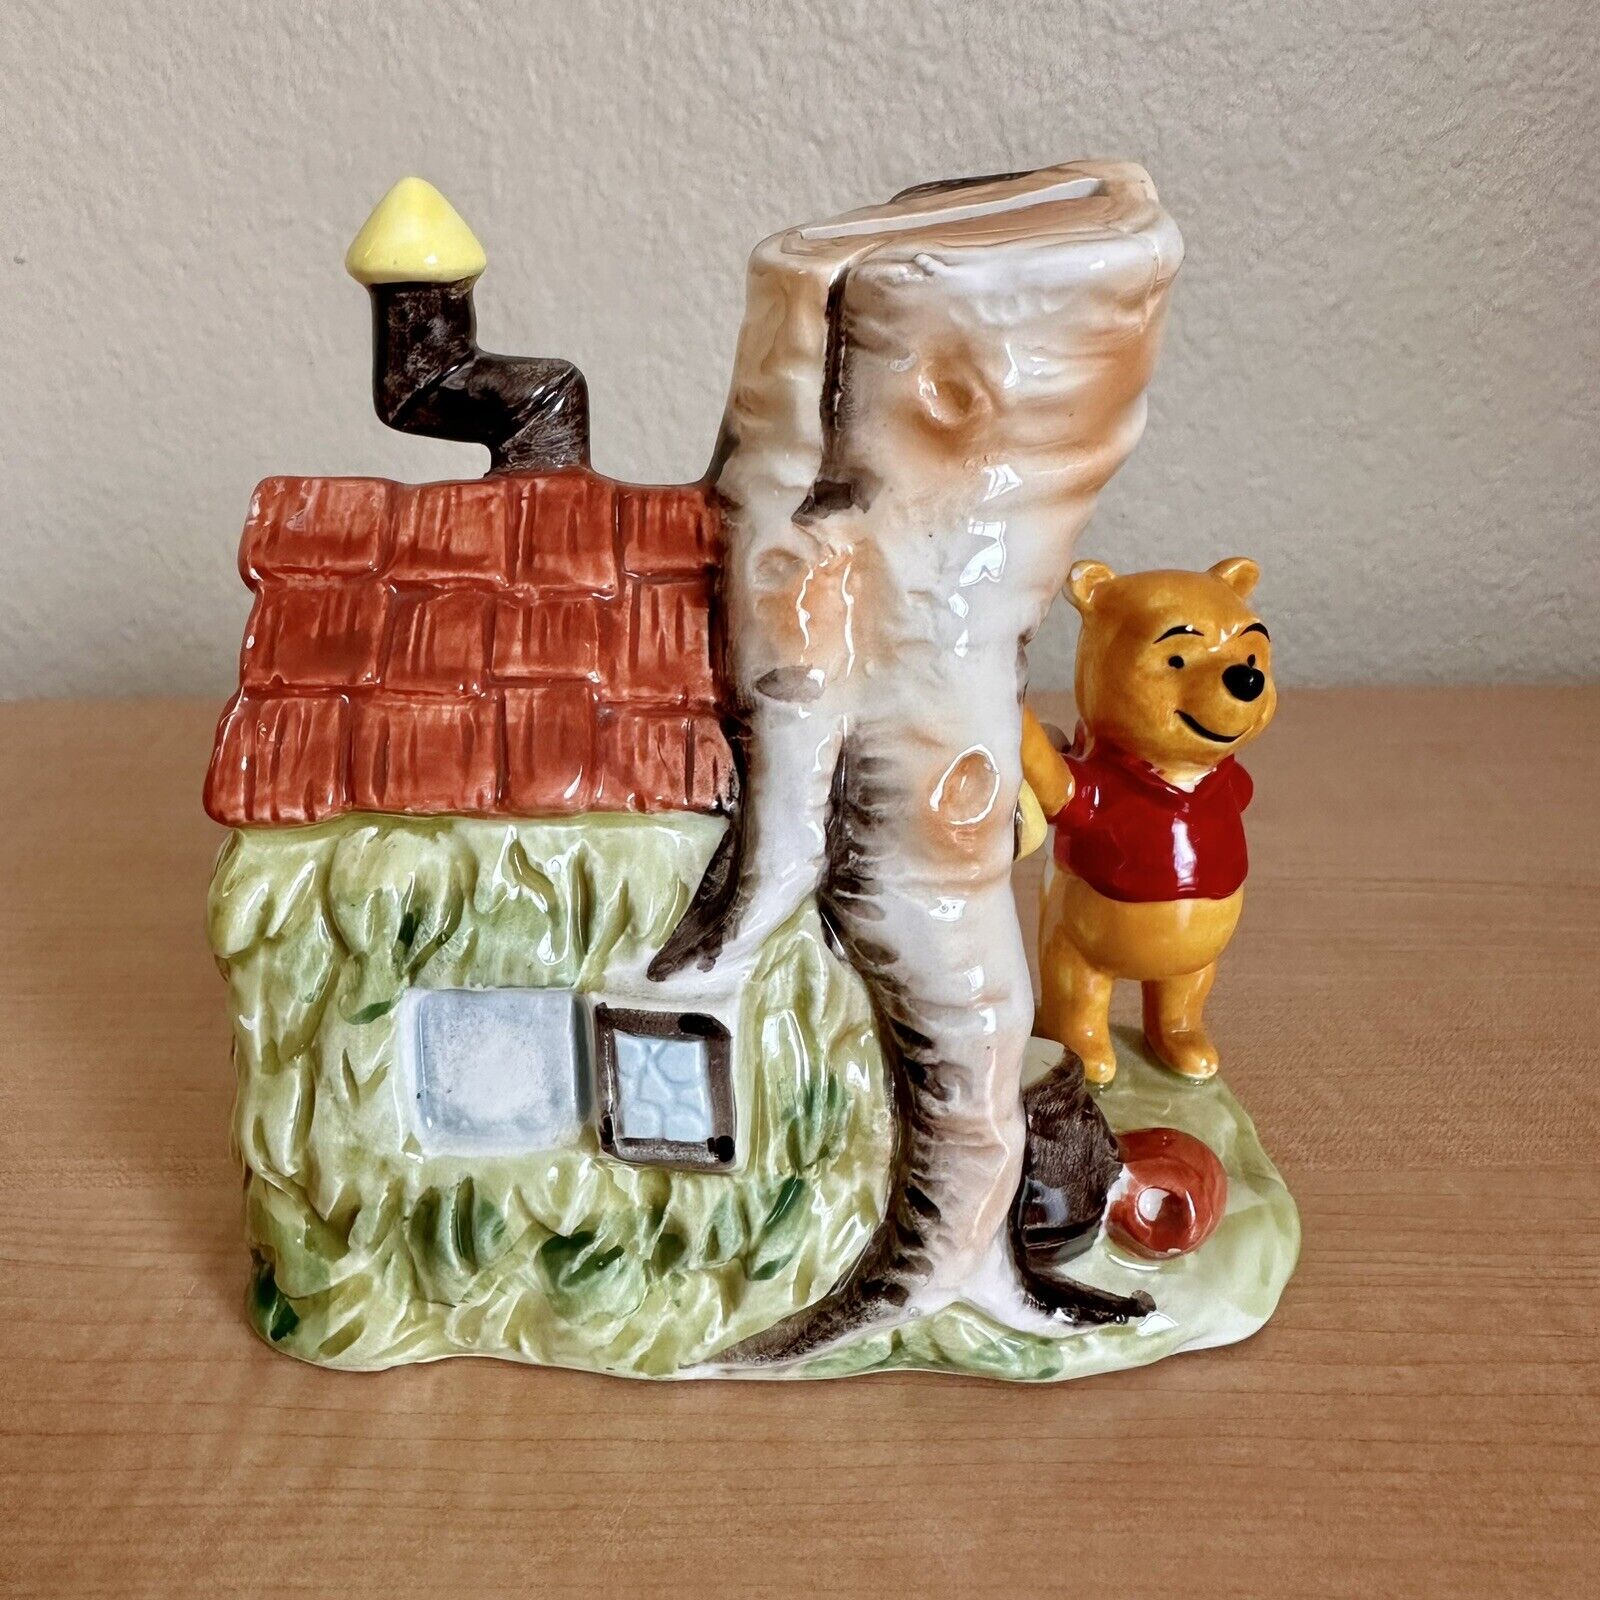 Rare VTG Walt Disney Productions Winnie The Pooh House Coin Bank Made in Japan